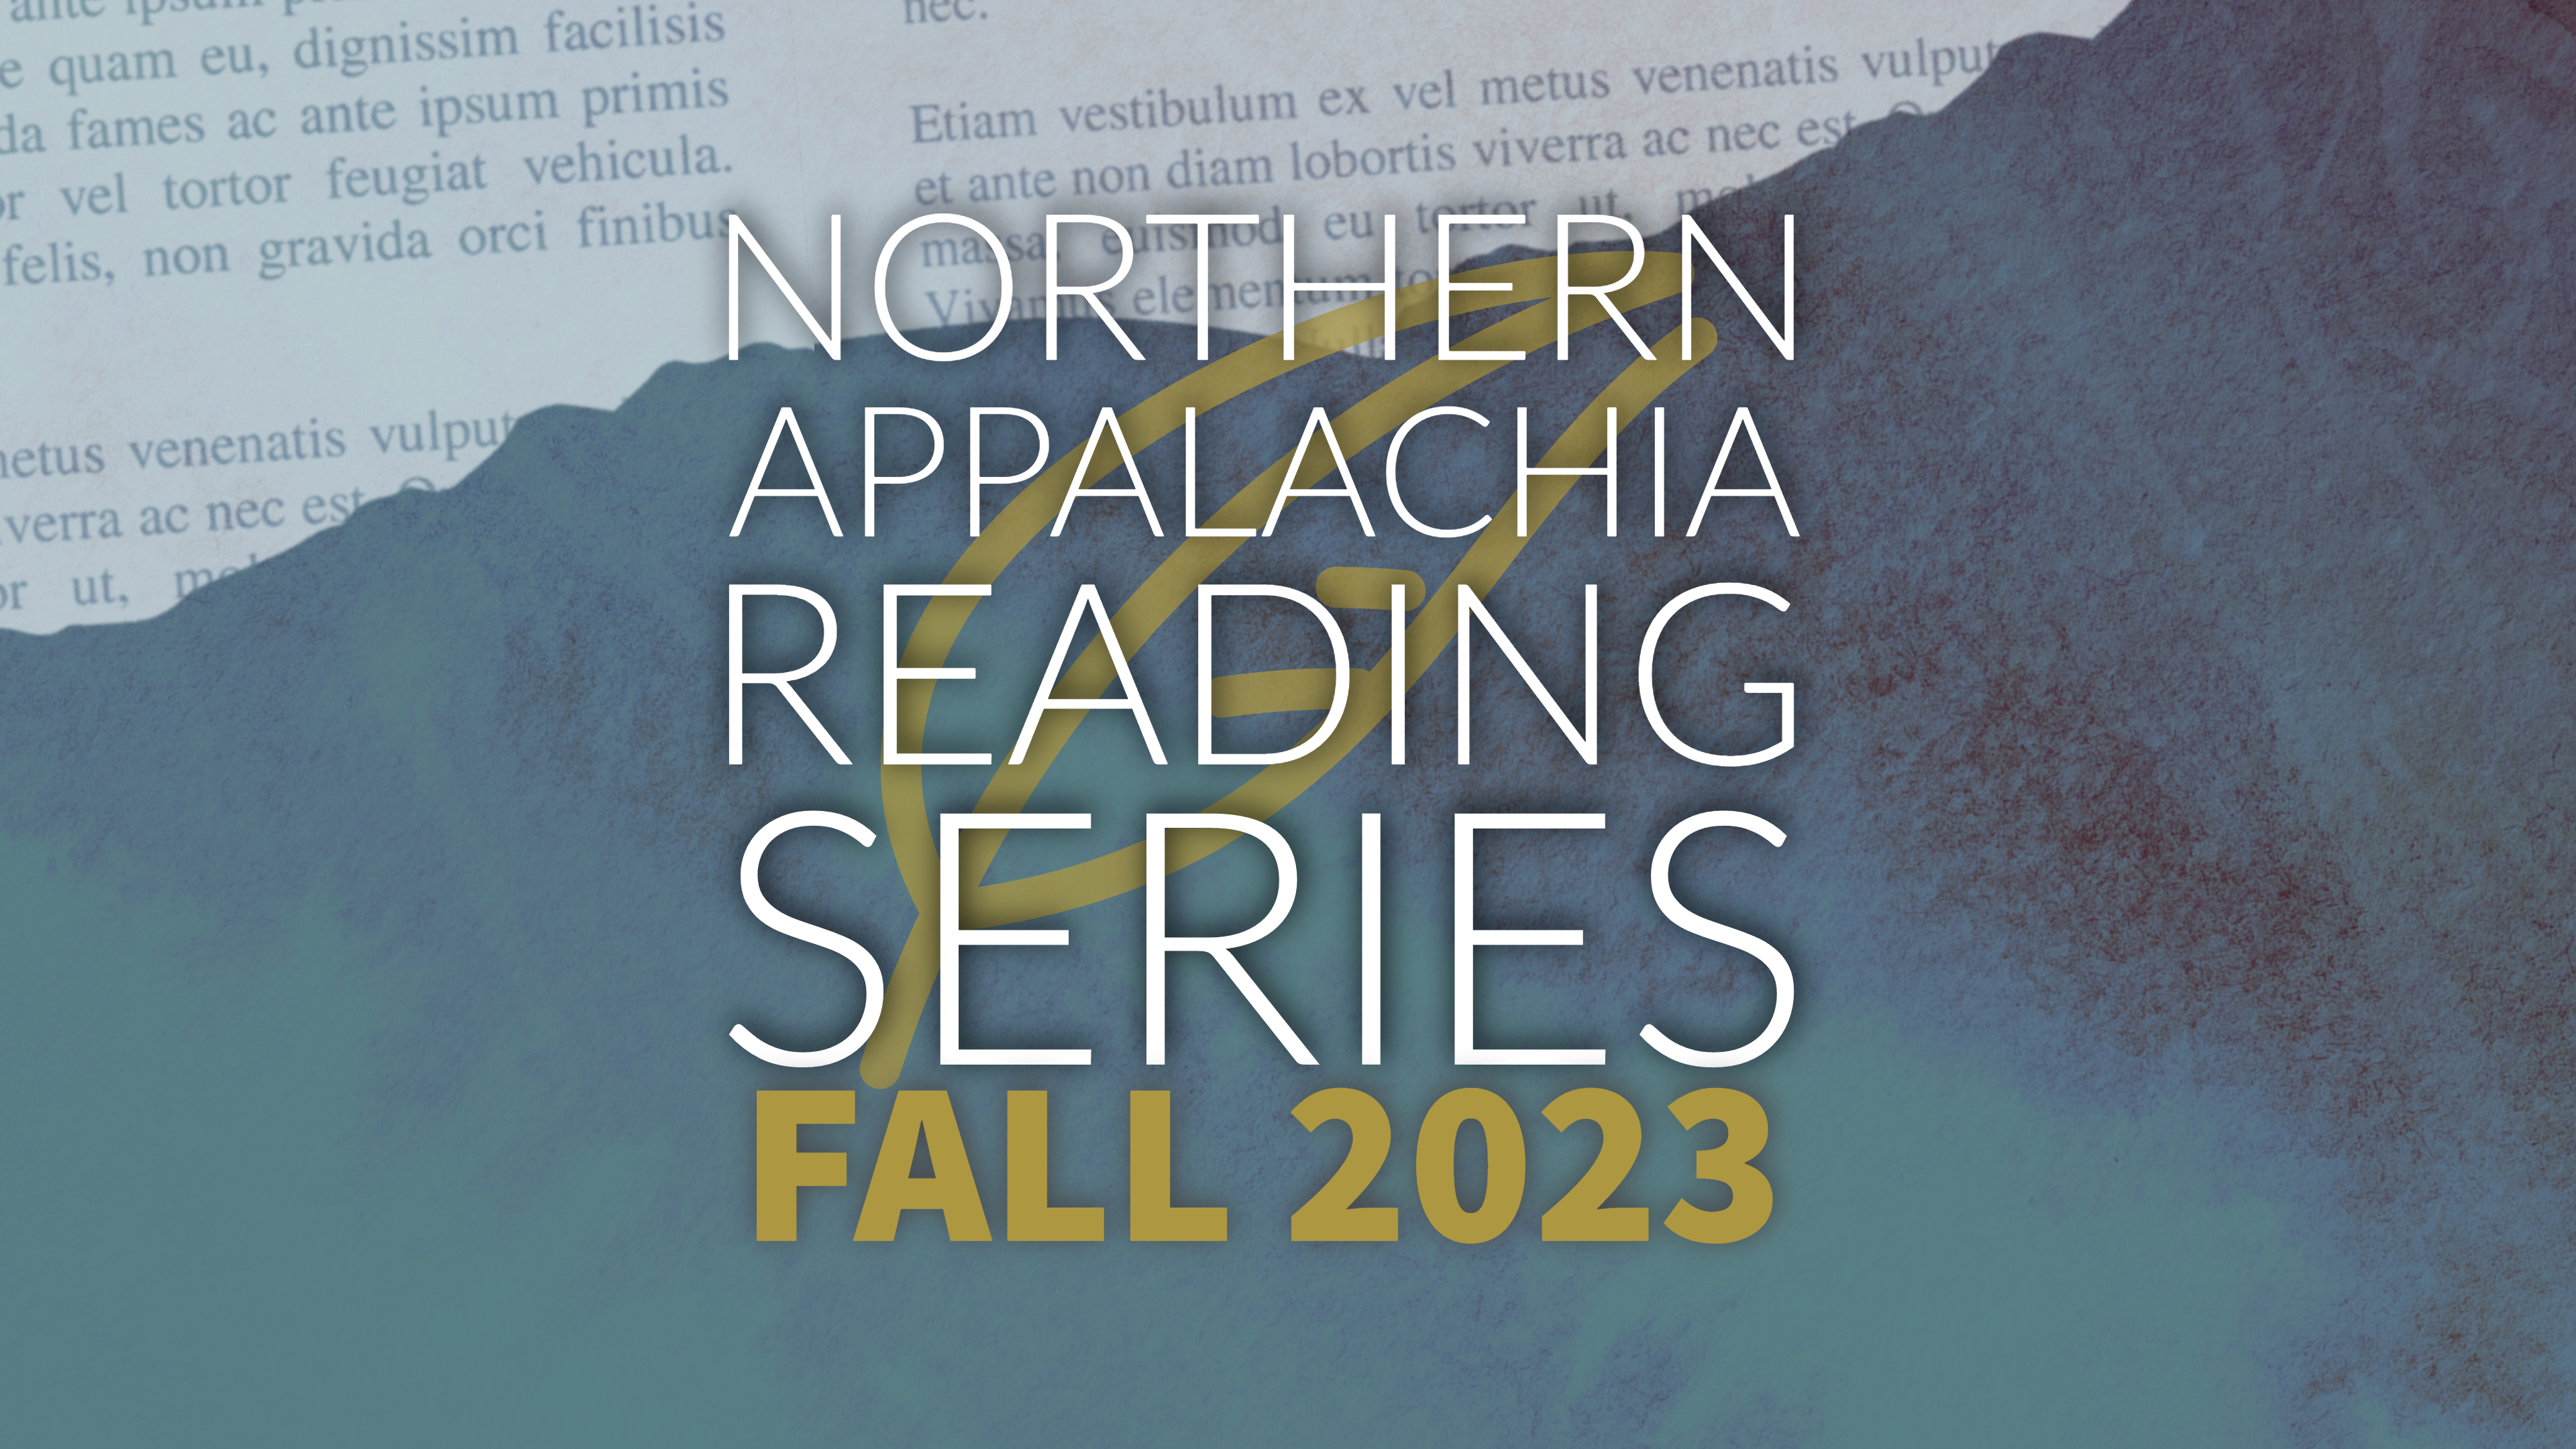 graphic with book pages as the sky and a mountain watercolor cutout overlayed with a logo that has a gold feather and text that reads "Northern appalachian reading series fall 2023"